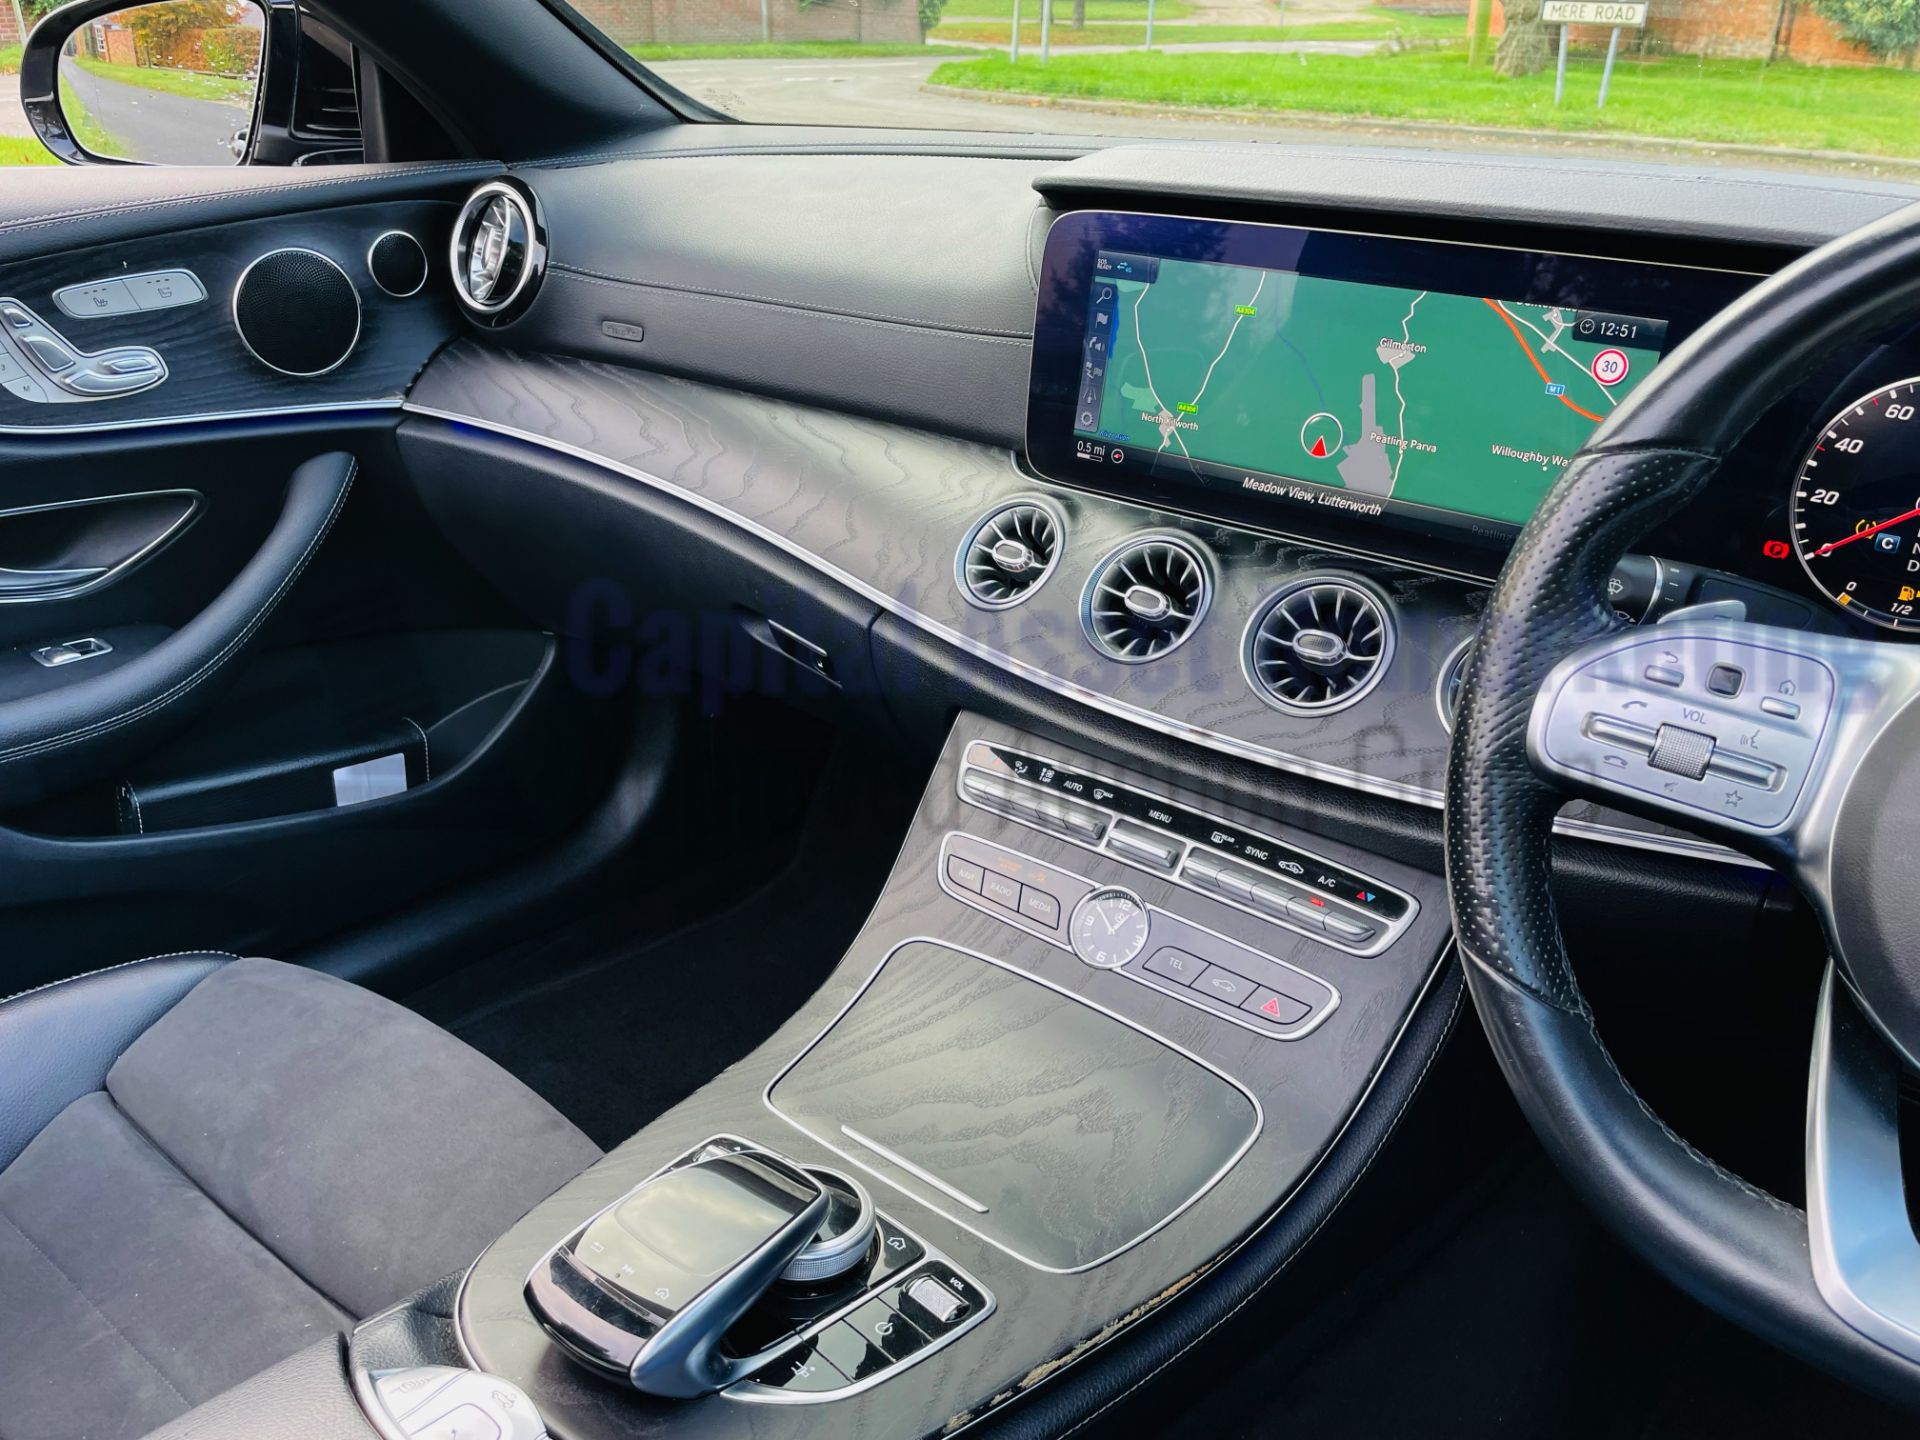 MERCEDES-BENZ E220D *AMG LINE - CABRIOLET* (2019 - EURO 6) '9G TRONIC AUTO - SAT NAV' *FULLY LOADED* - Image 54 of 66